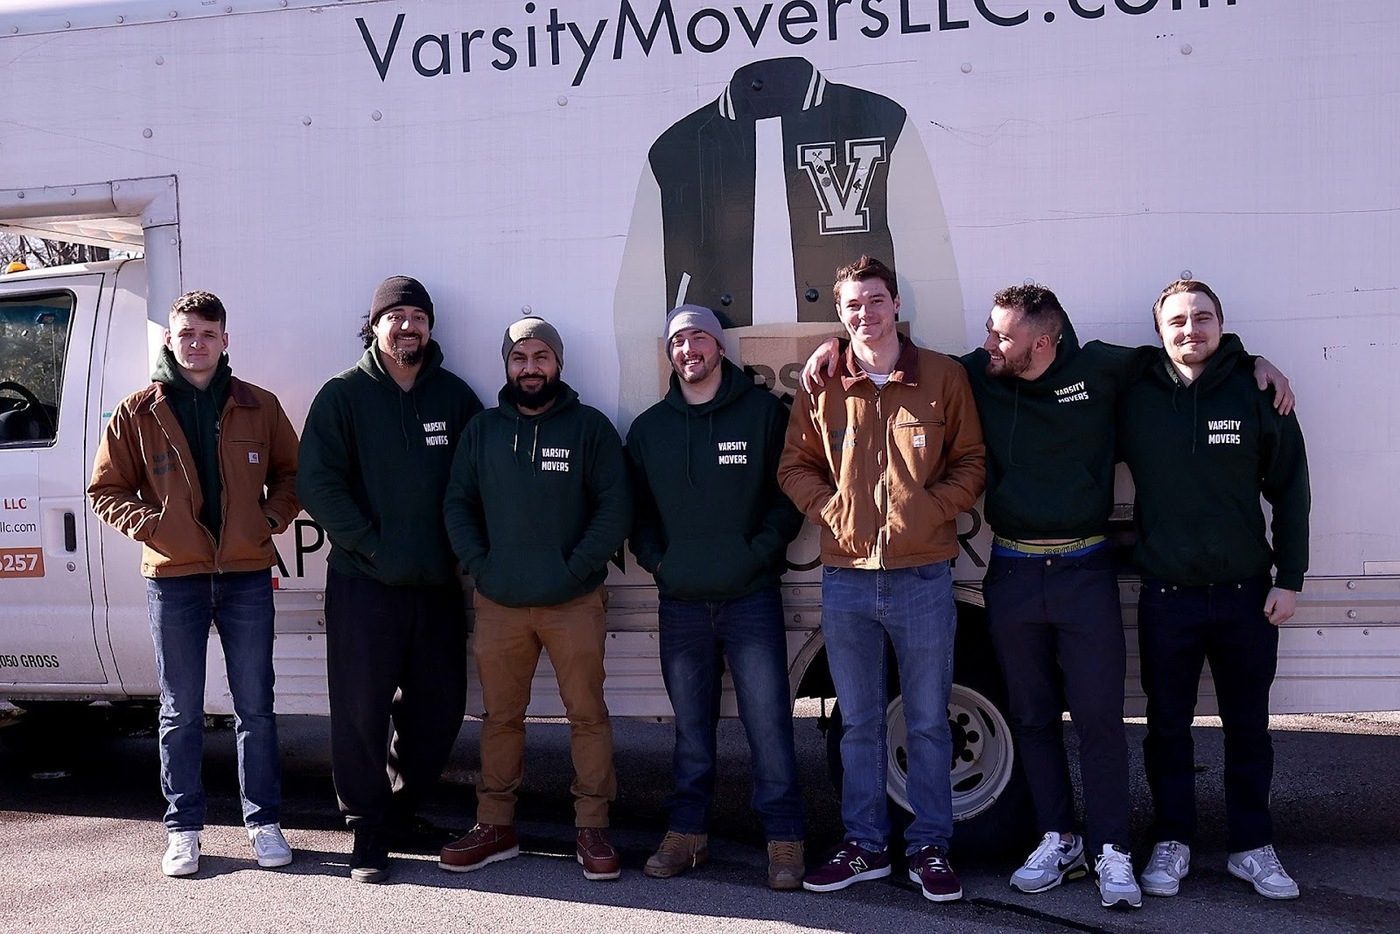 Varsity Movers LLC is a team of professional and reliable Hopkinton movers offering full-scale moving services, including local moving, apartment moving, small moving, moving labor, assisted living moving, home staging, and interstate moving.